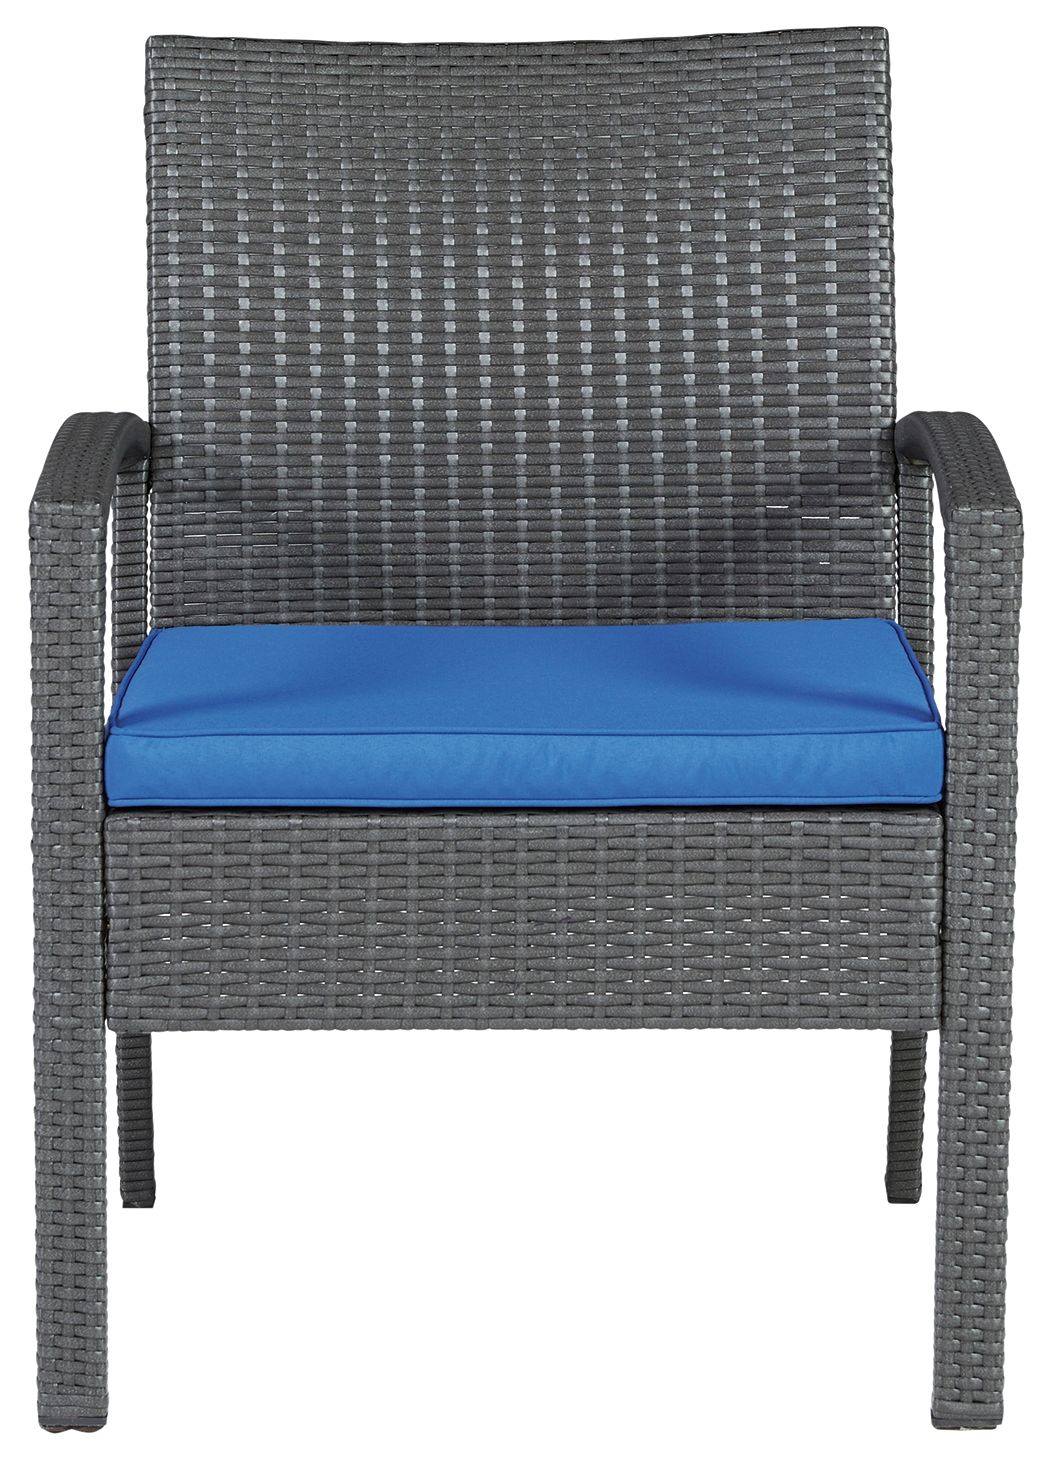 Alina - Gray / Blue - Love/Chairs/Table Set (Set of 4)